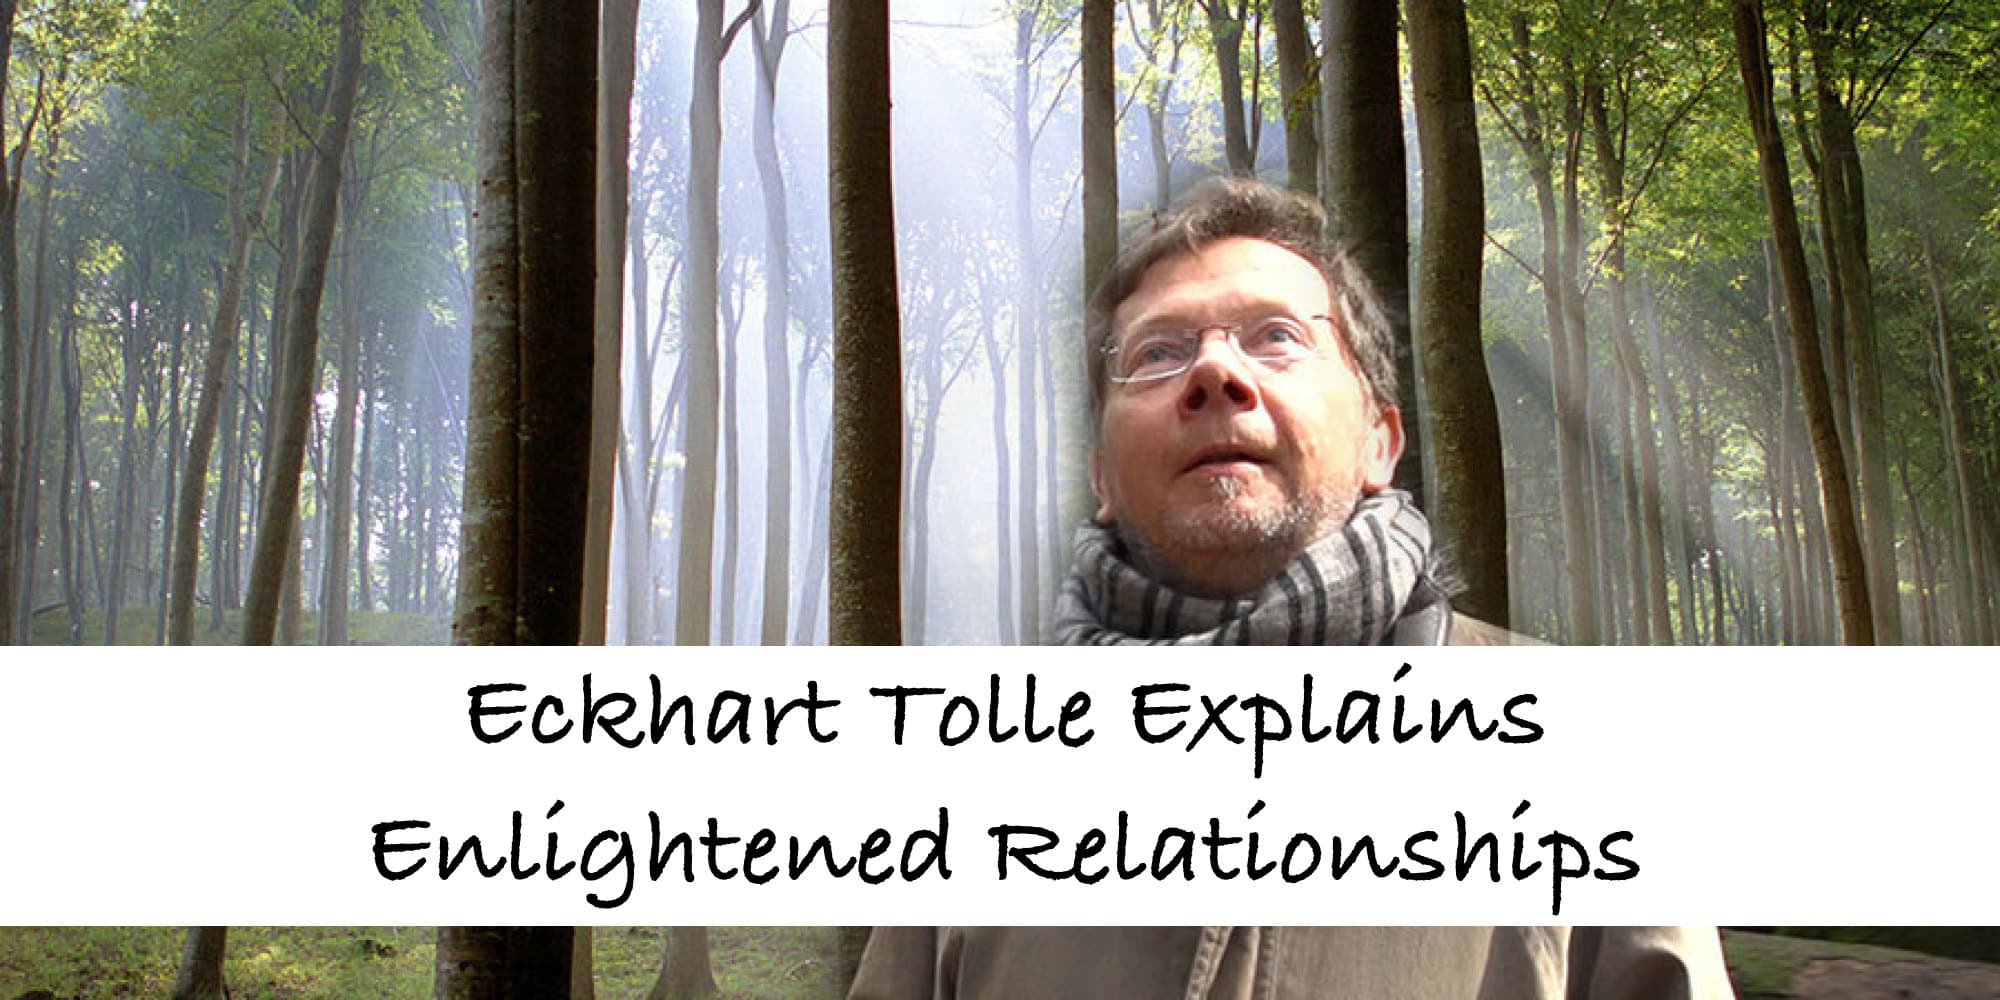 You are currently viewing Eckhart Tolle on Enlightened Relationships